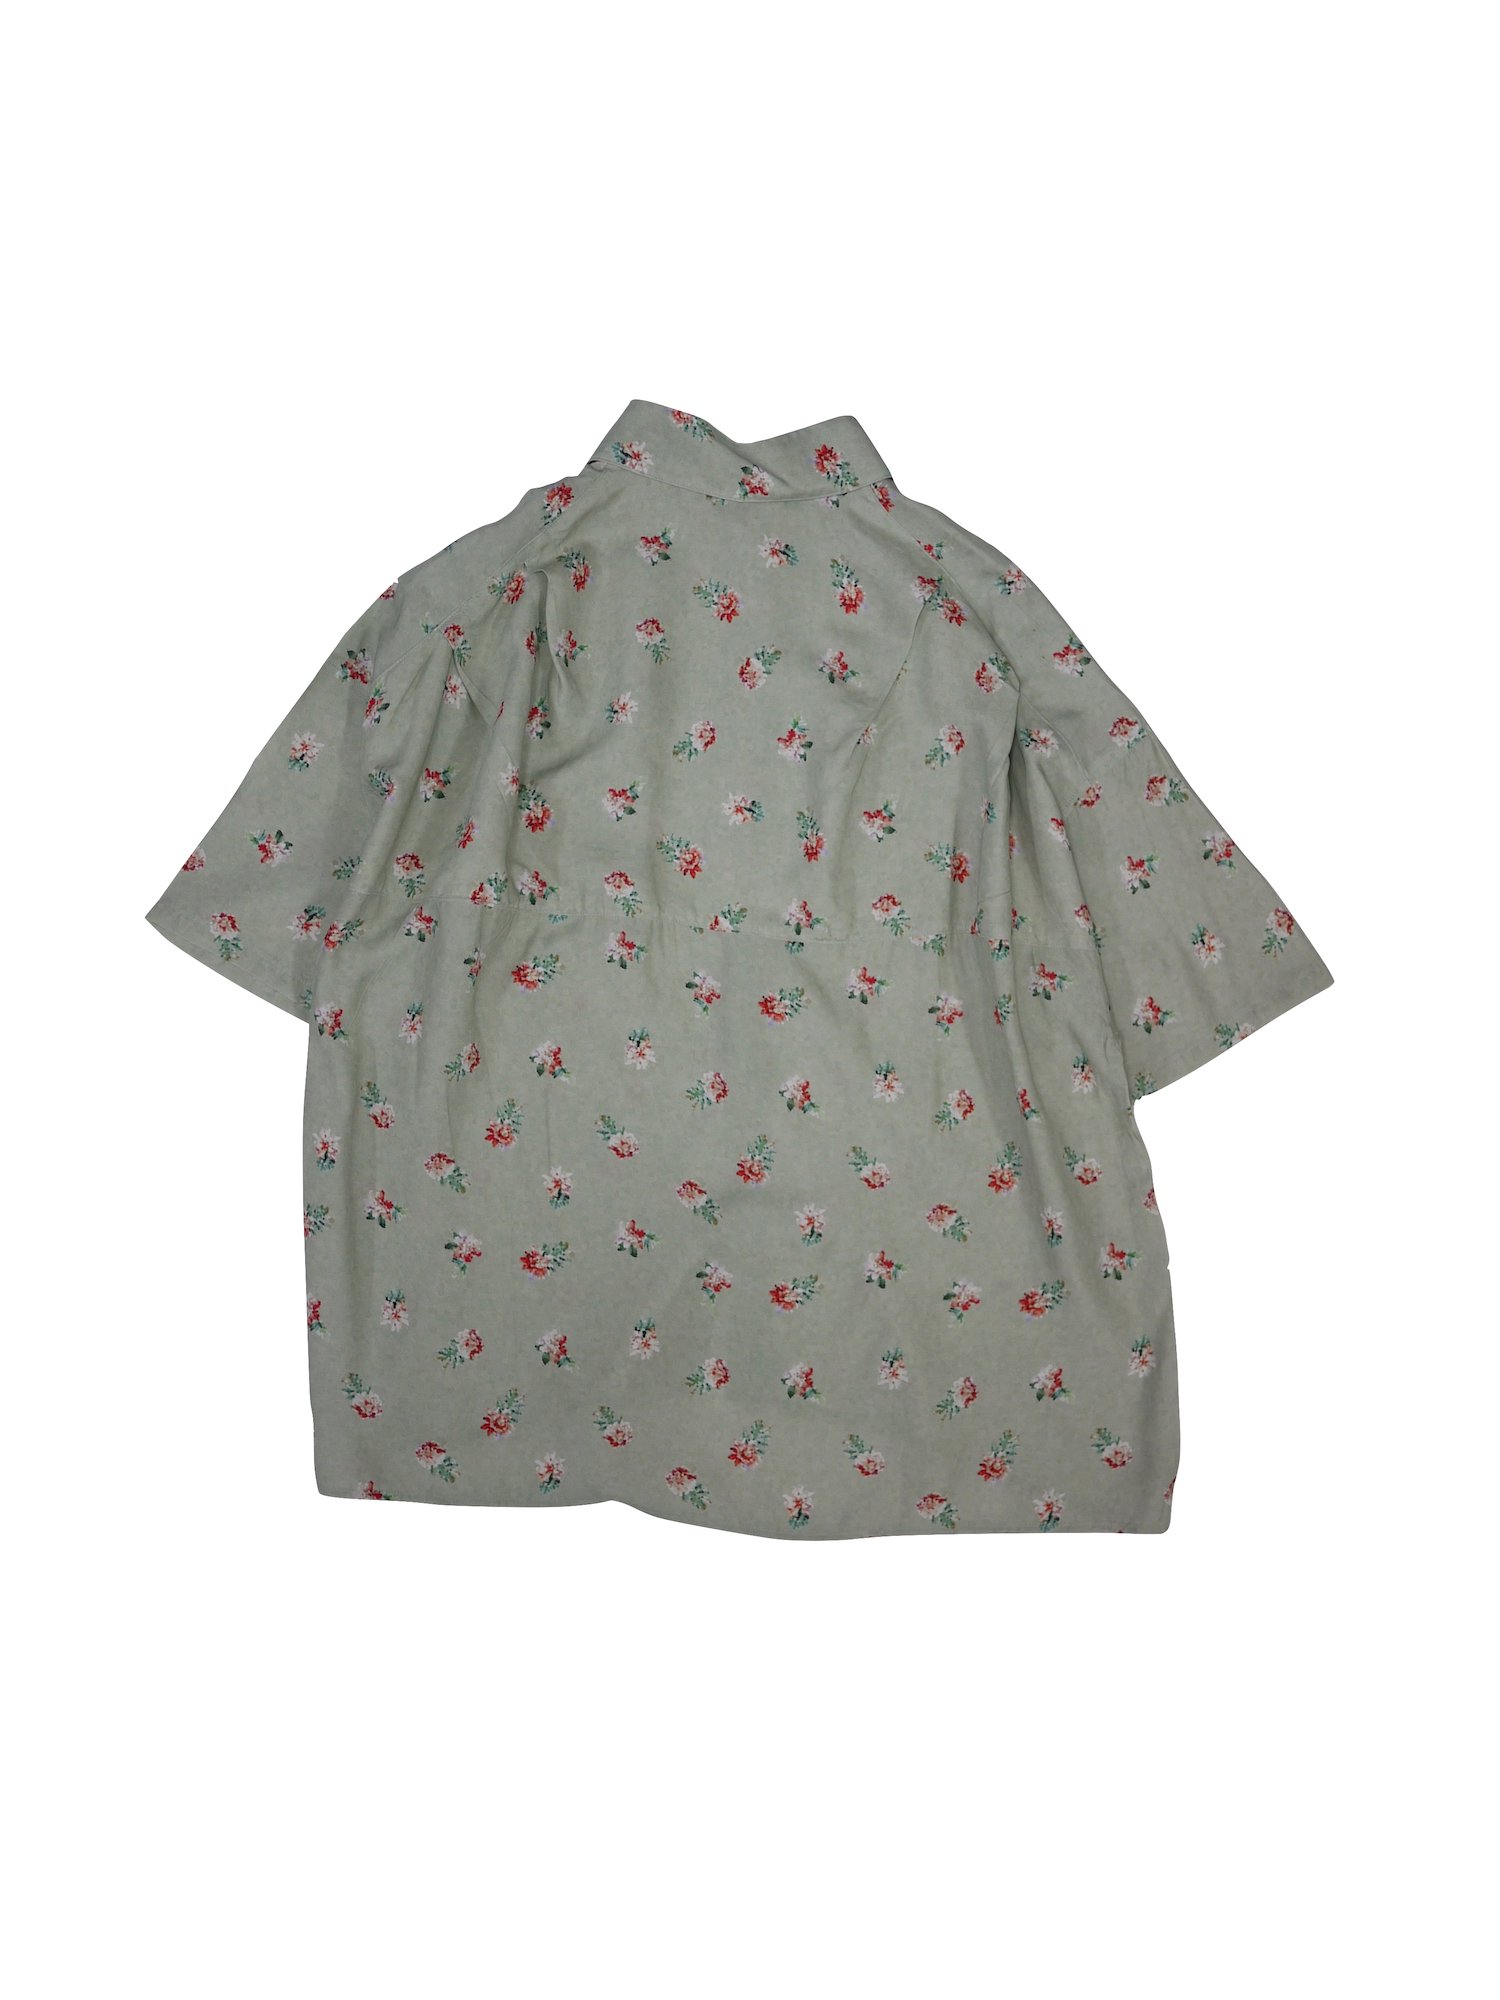 JieDa<br />FLOWER OVERSIZED SHIRT S/S <img class='new_mark_img2' src='https://img.shop-pro.jp/img/new/icons14.gif' style='border:none;display:inline;margin:0px;padding:0px;width:auto;' />